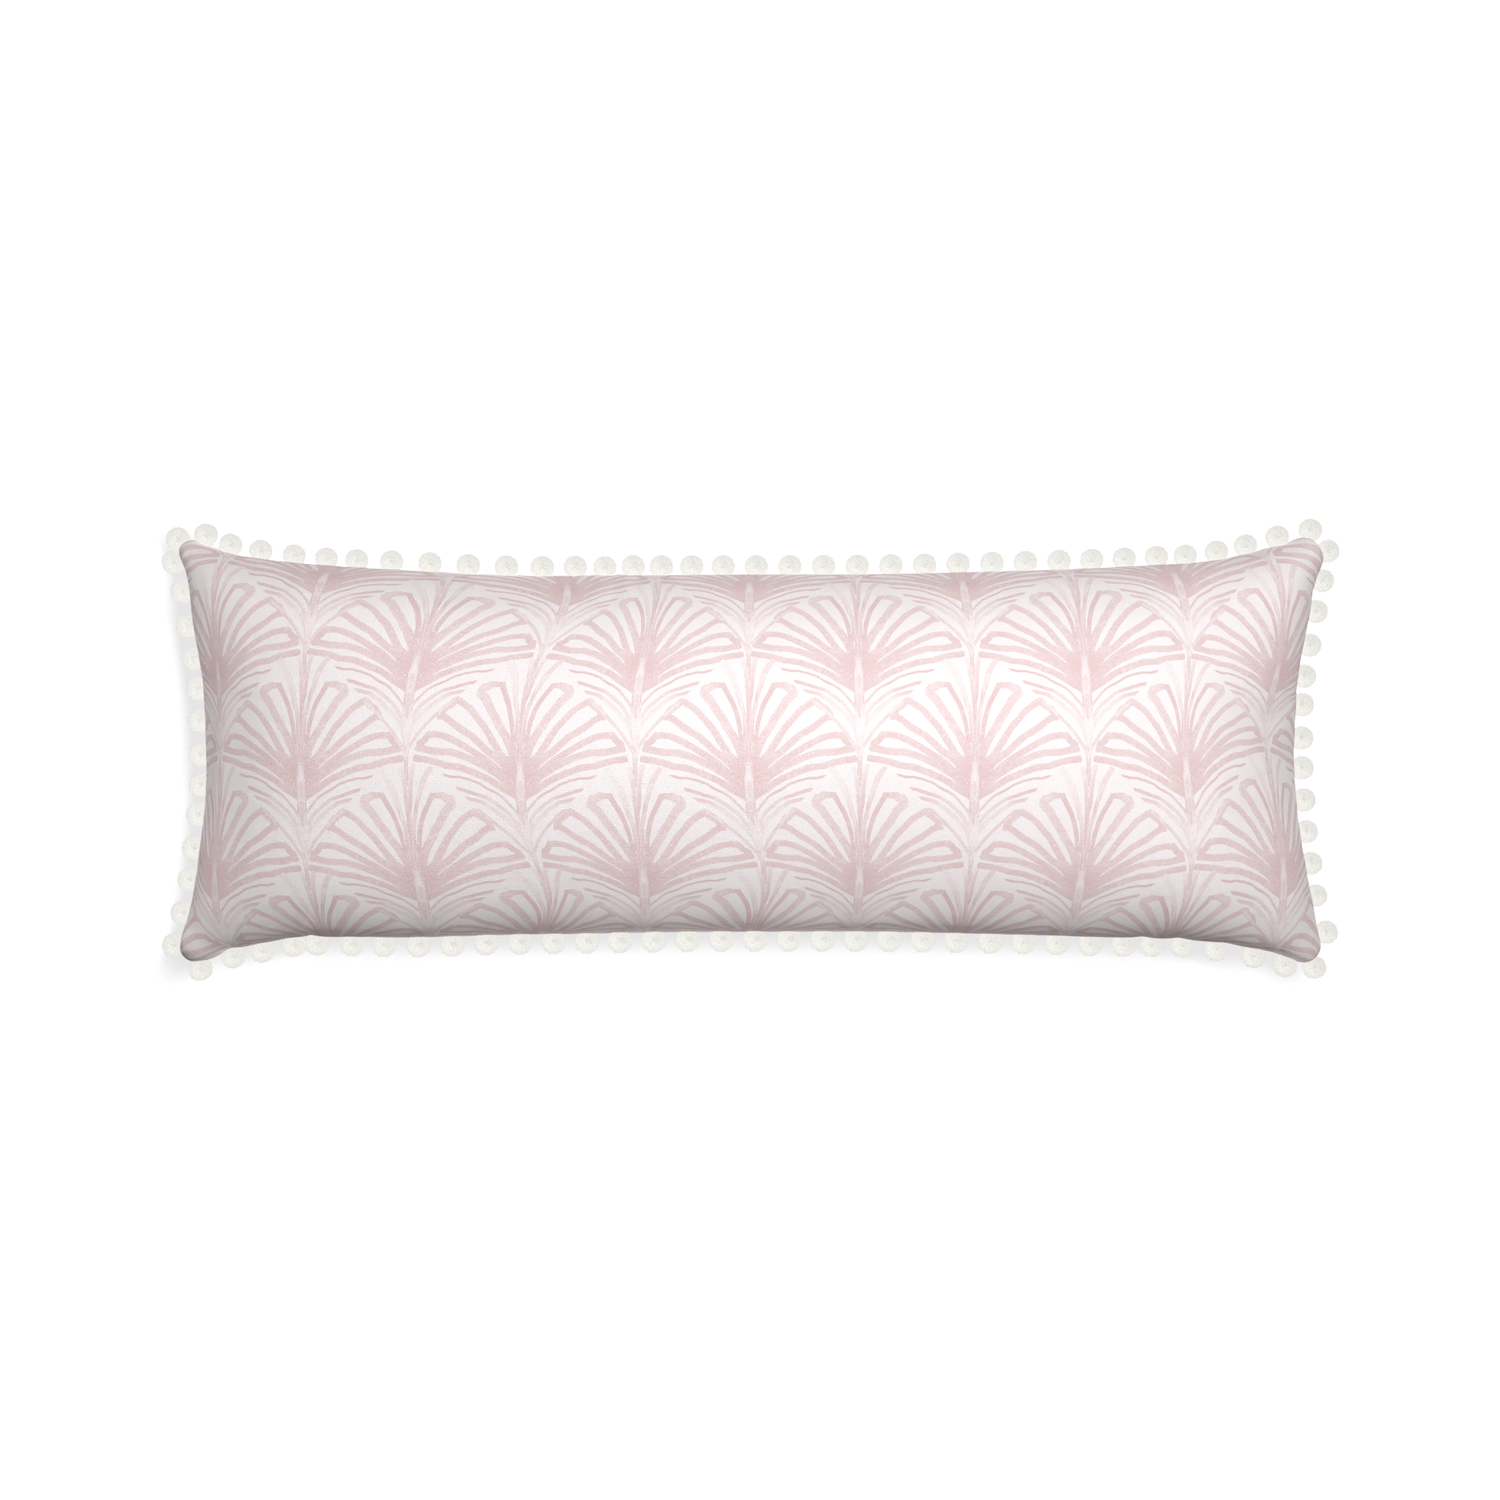 Xl-lumbar suzy rose custom rose pink palmpillow with snow pom pom on white background